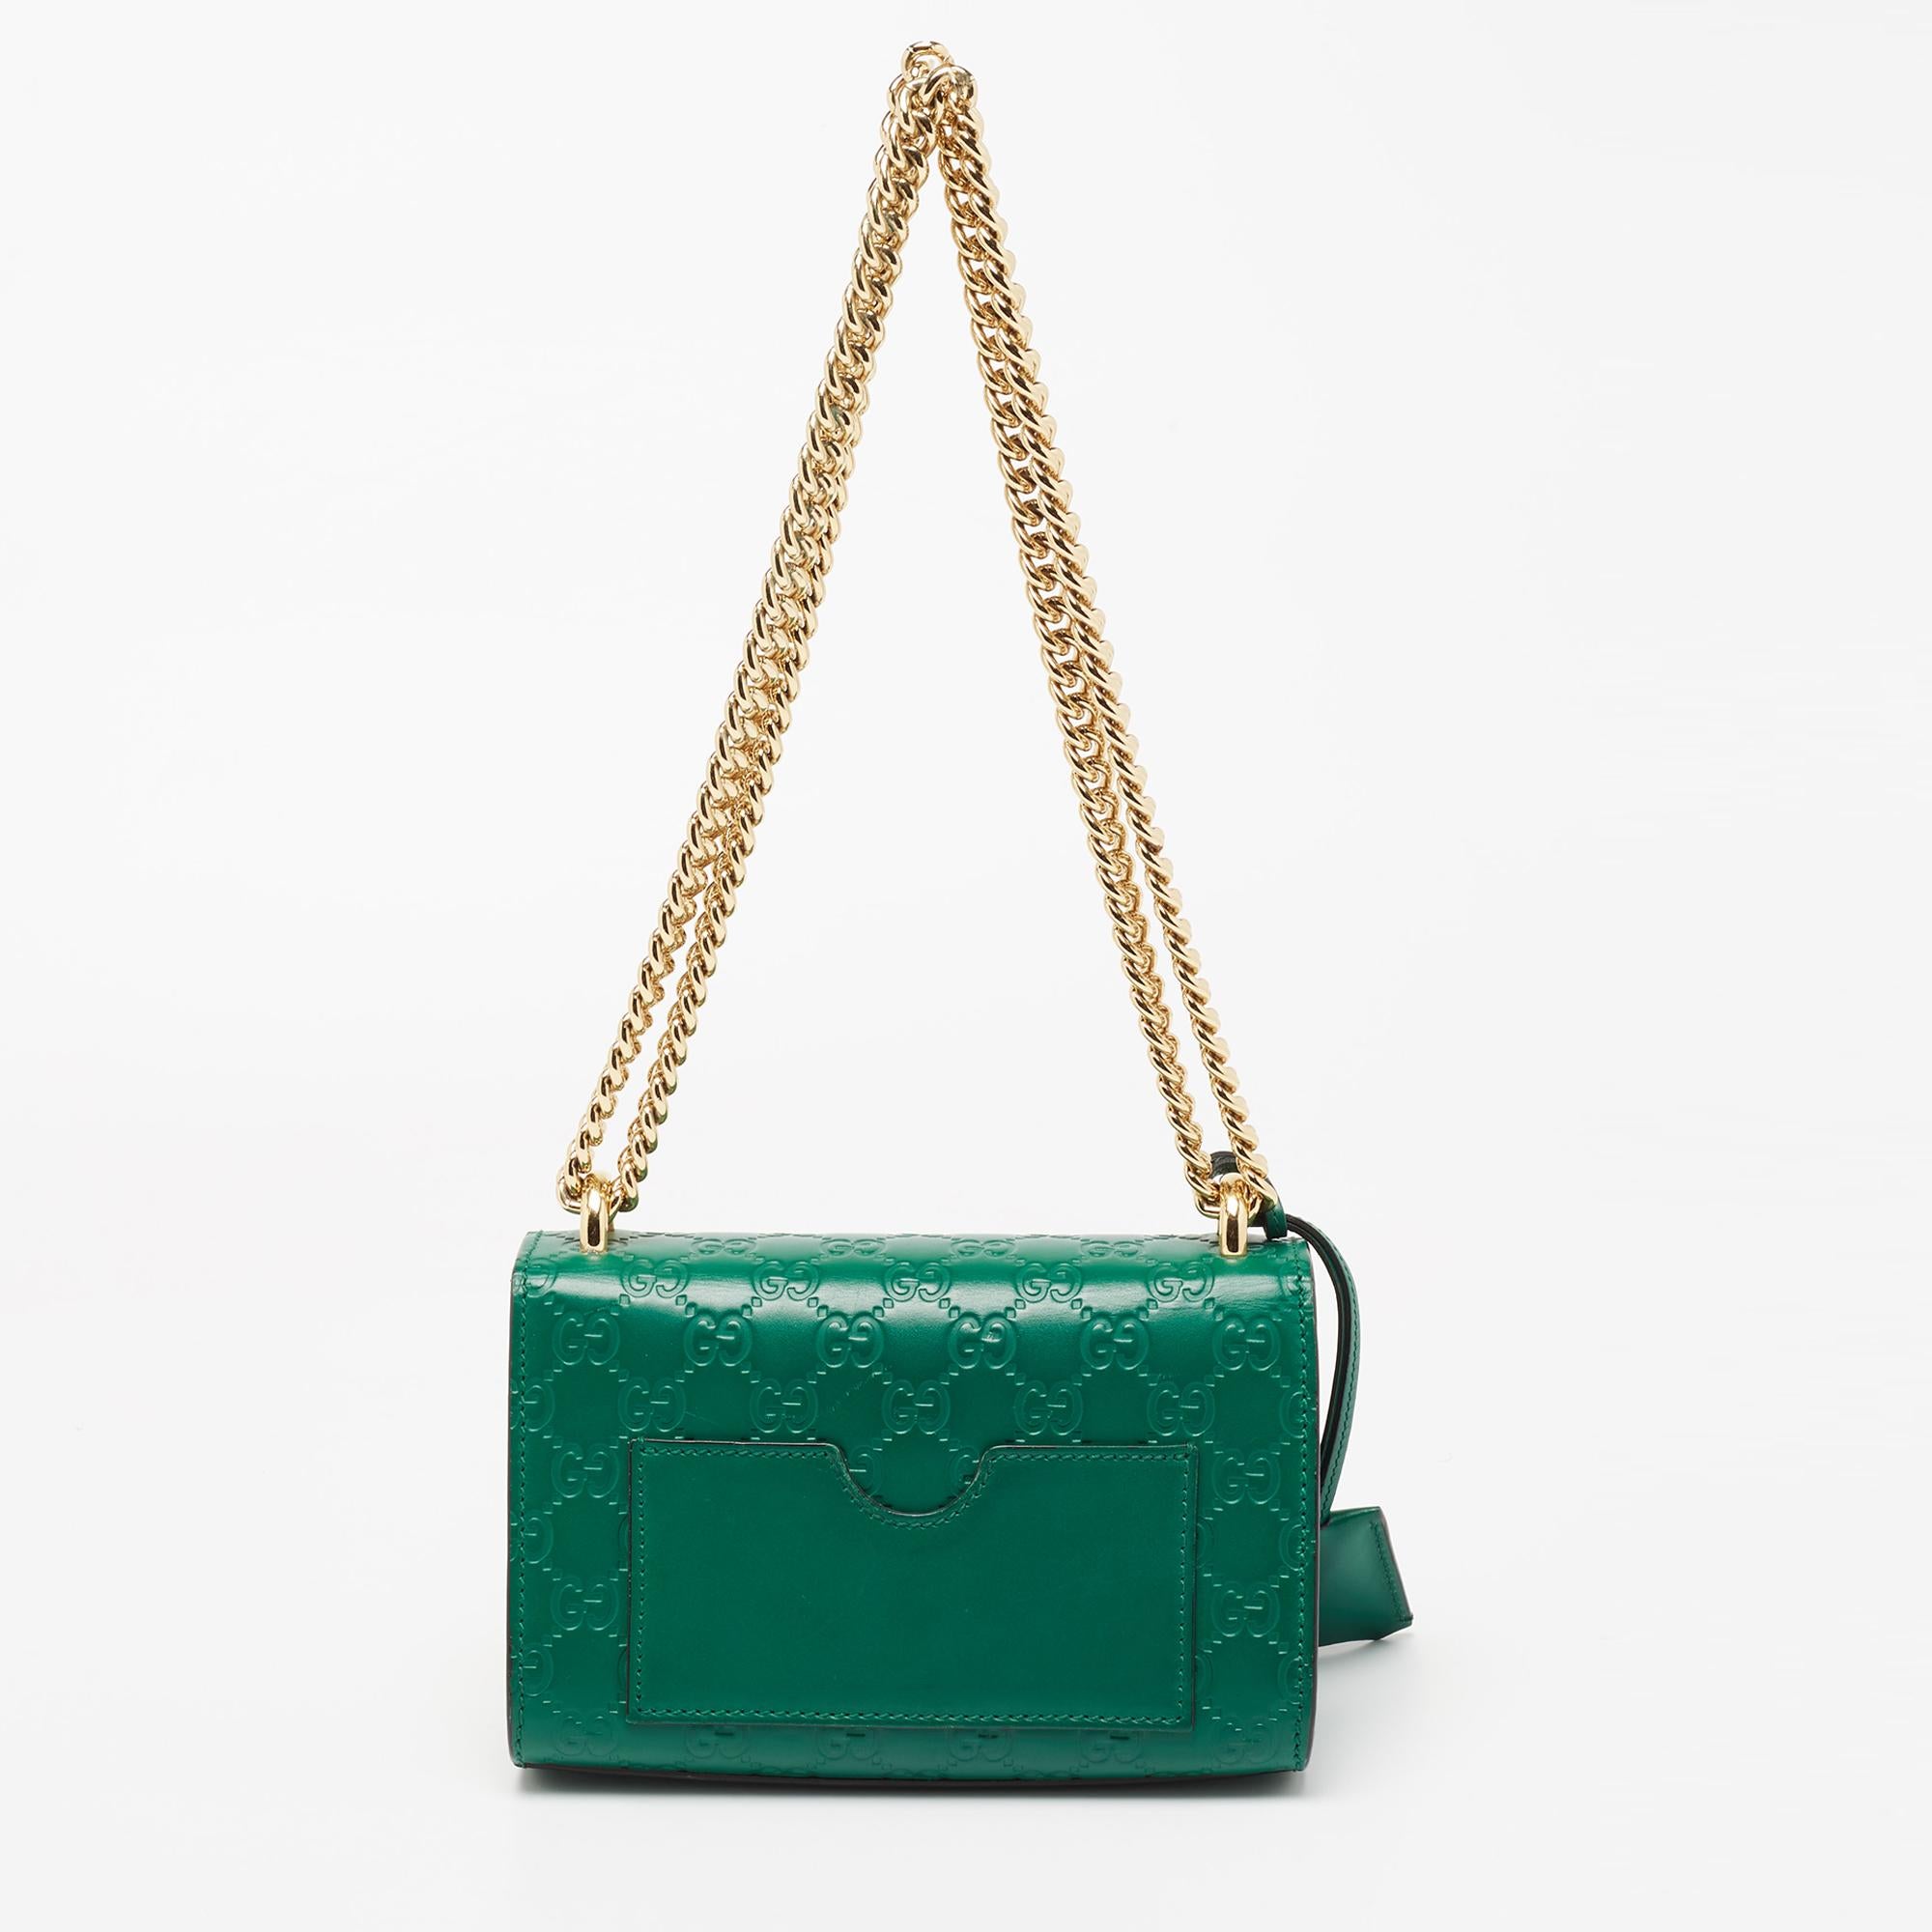 Embodying the vibrant spirit of the House, this Gucci shoulder bag is presented with a green leather exterior. It has a metal lock on the flap to secure the Alcantara-lined interior and a chain is provided for shoulder and crossbody wear.

Includes: